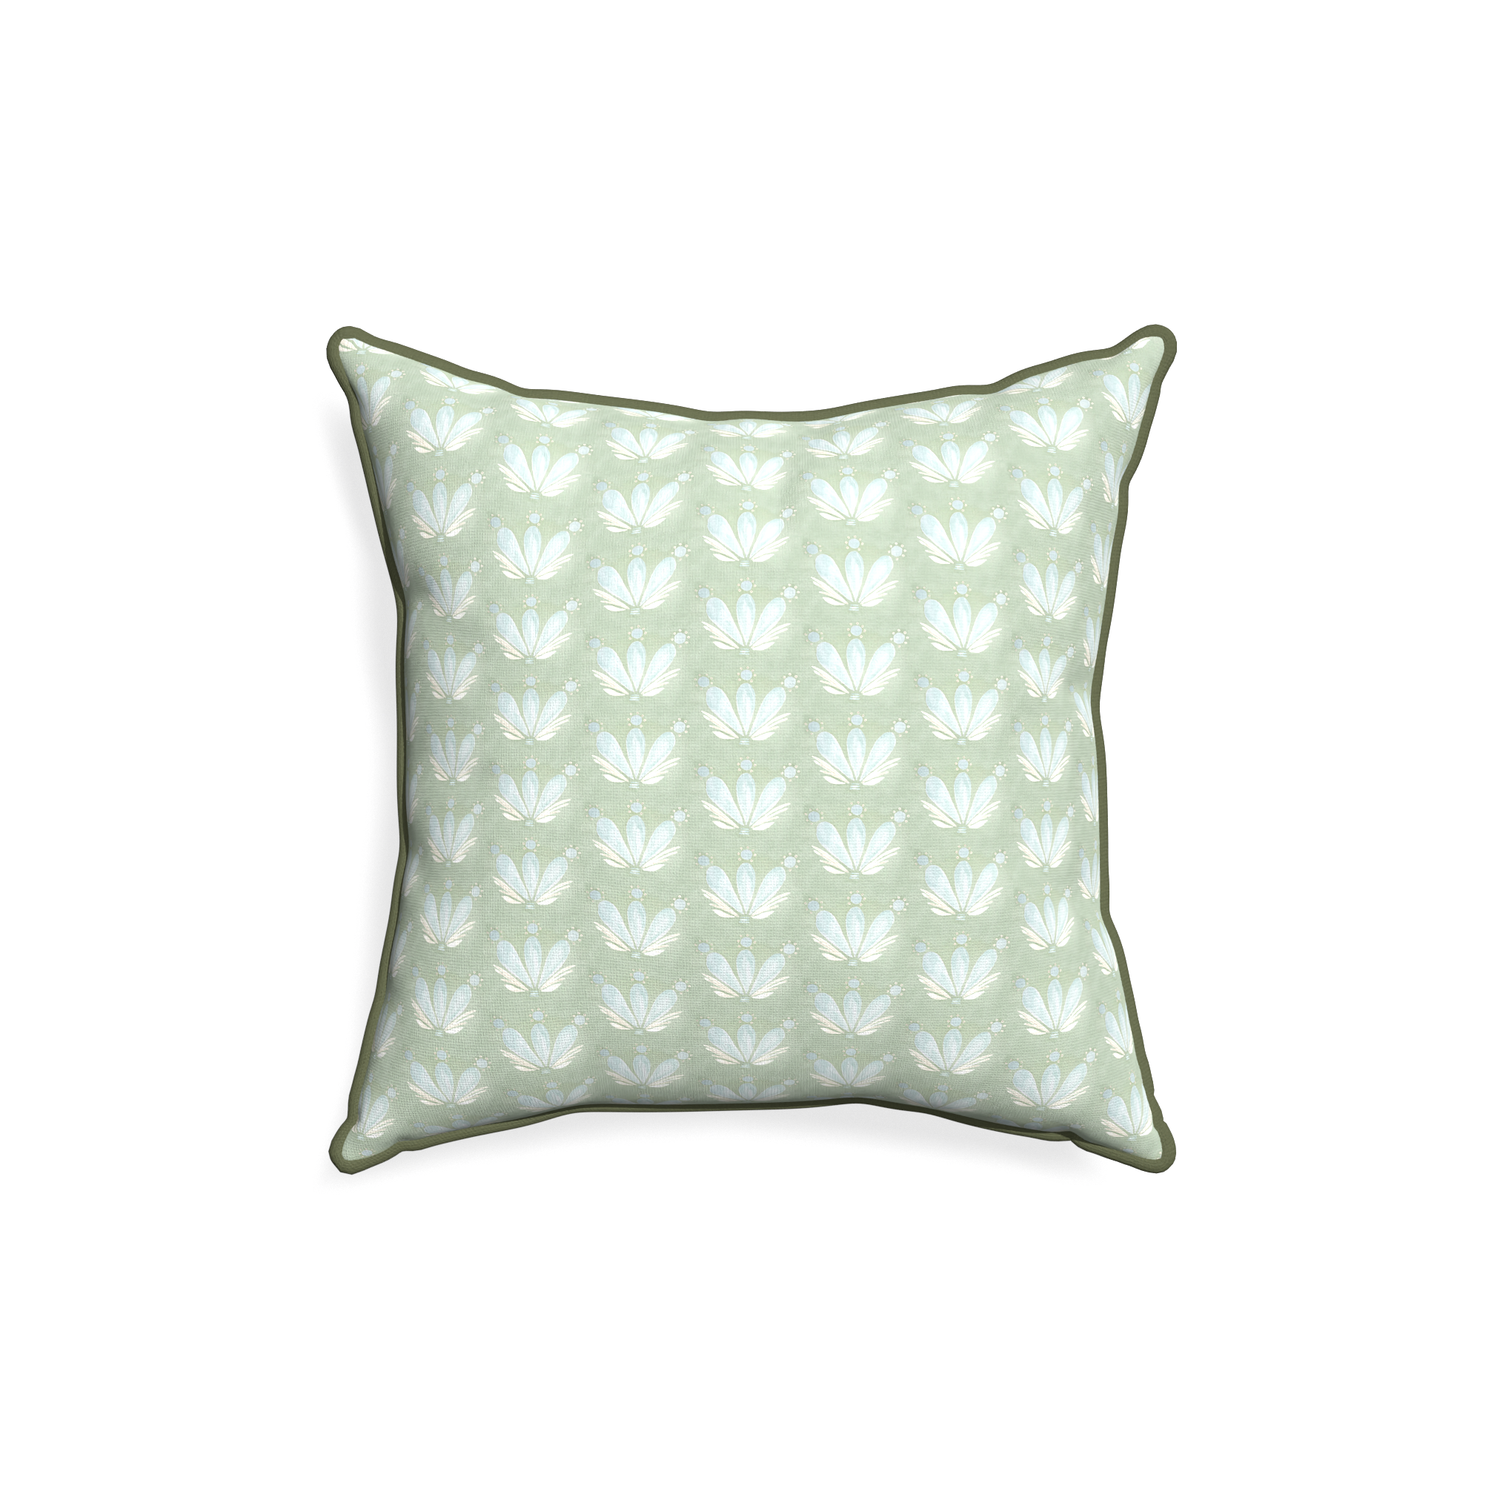 18-square serena sea salt custom pillow with f piping on white background